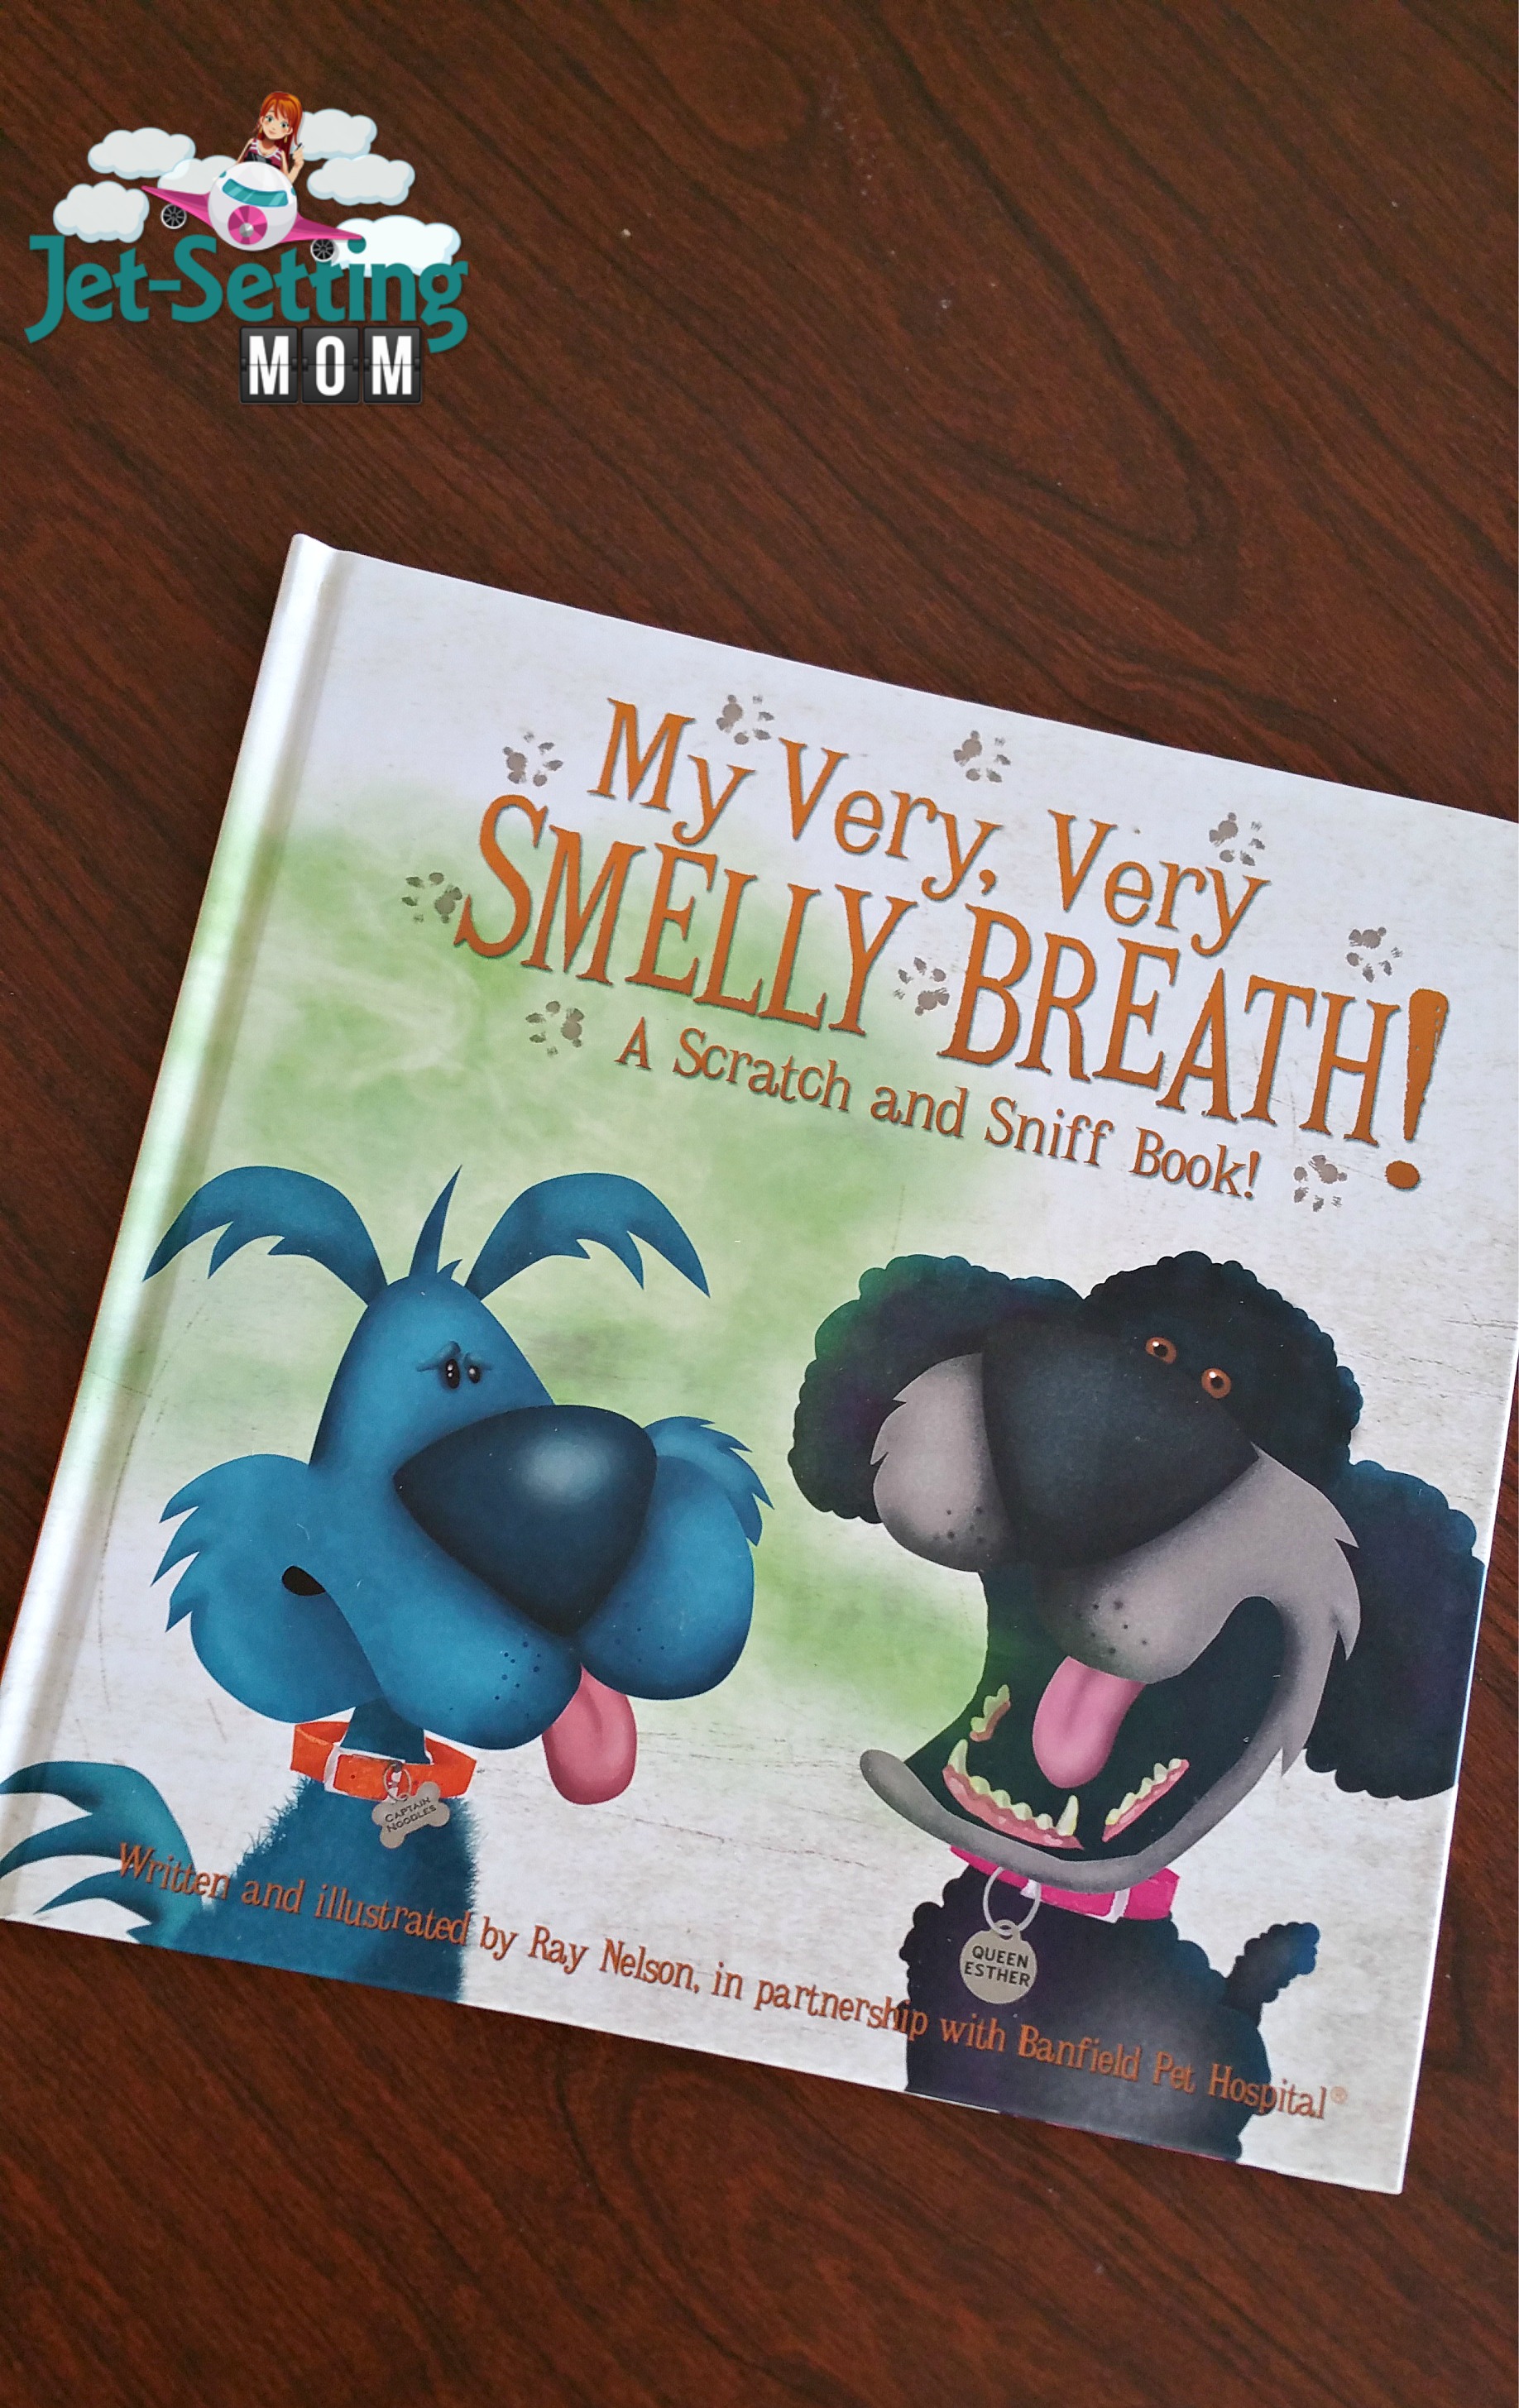 We loved reading My Very, Very Smelly Breath scratch and sniff book at our #disneykids playdate!